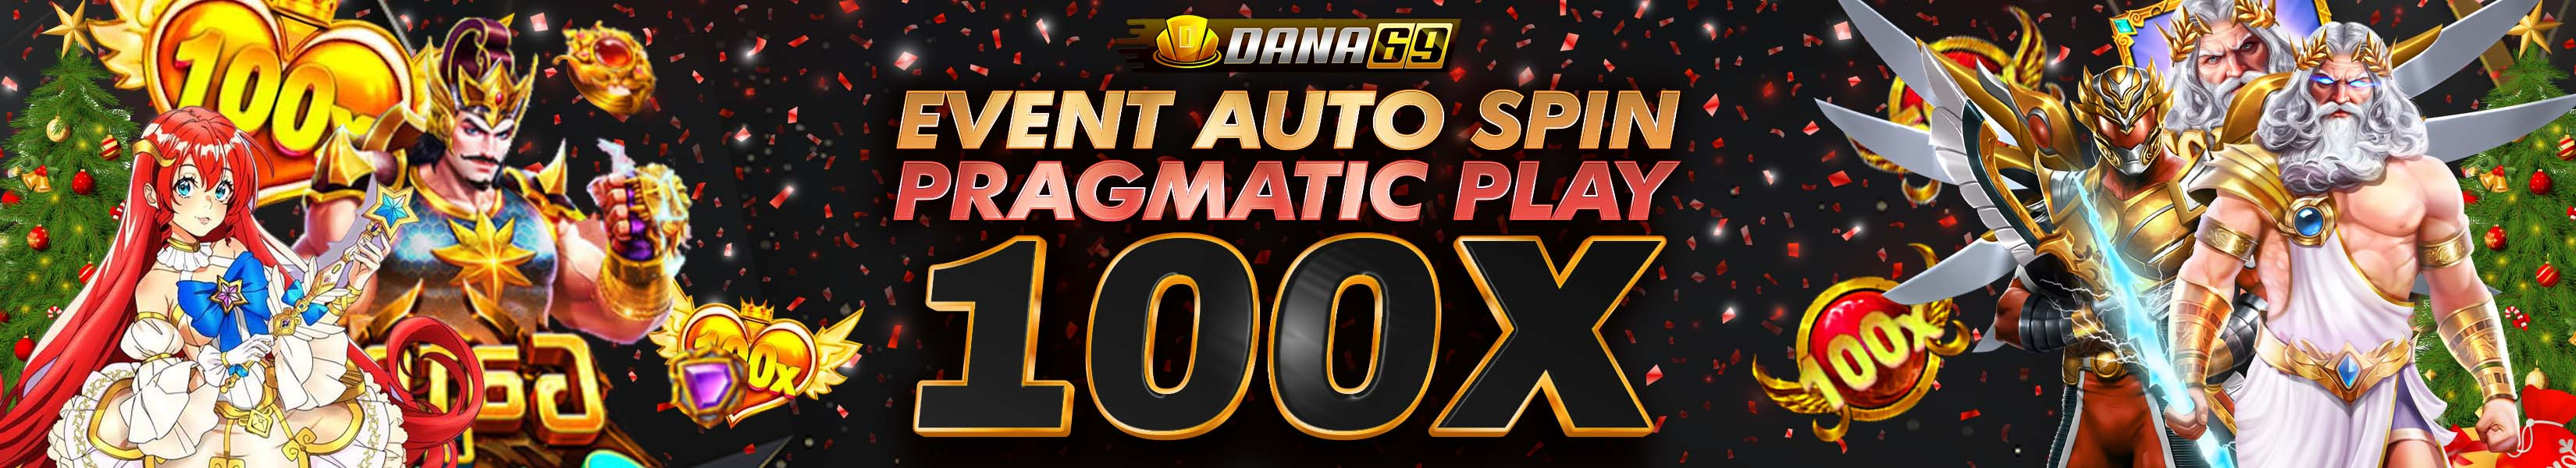 EVENT AUTOSPIN PRAGMATIC PLAY